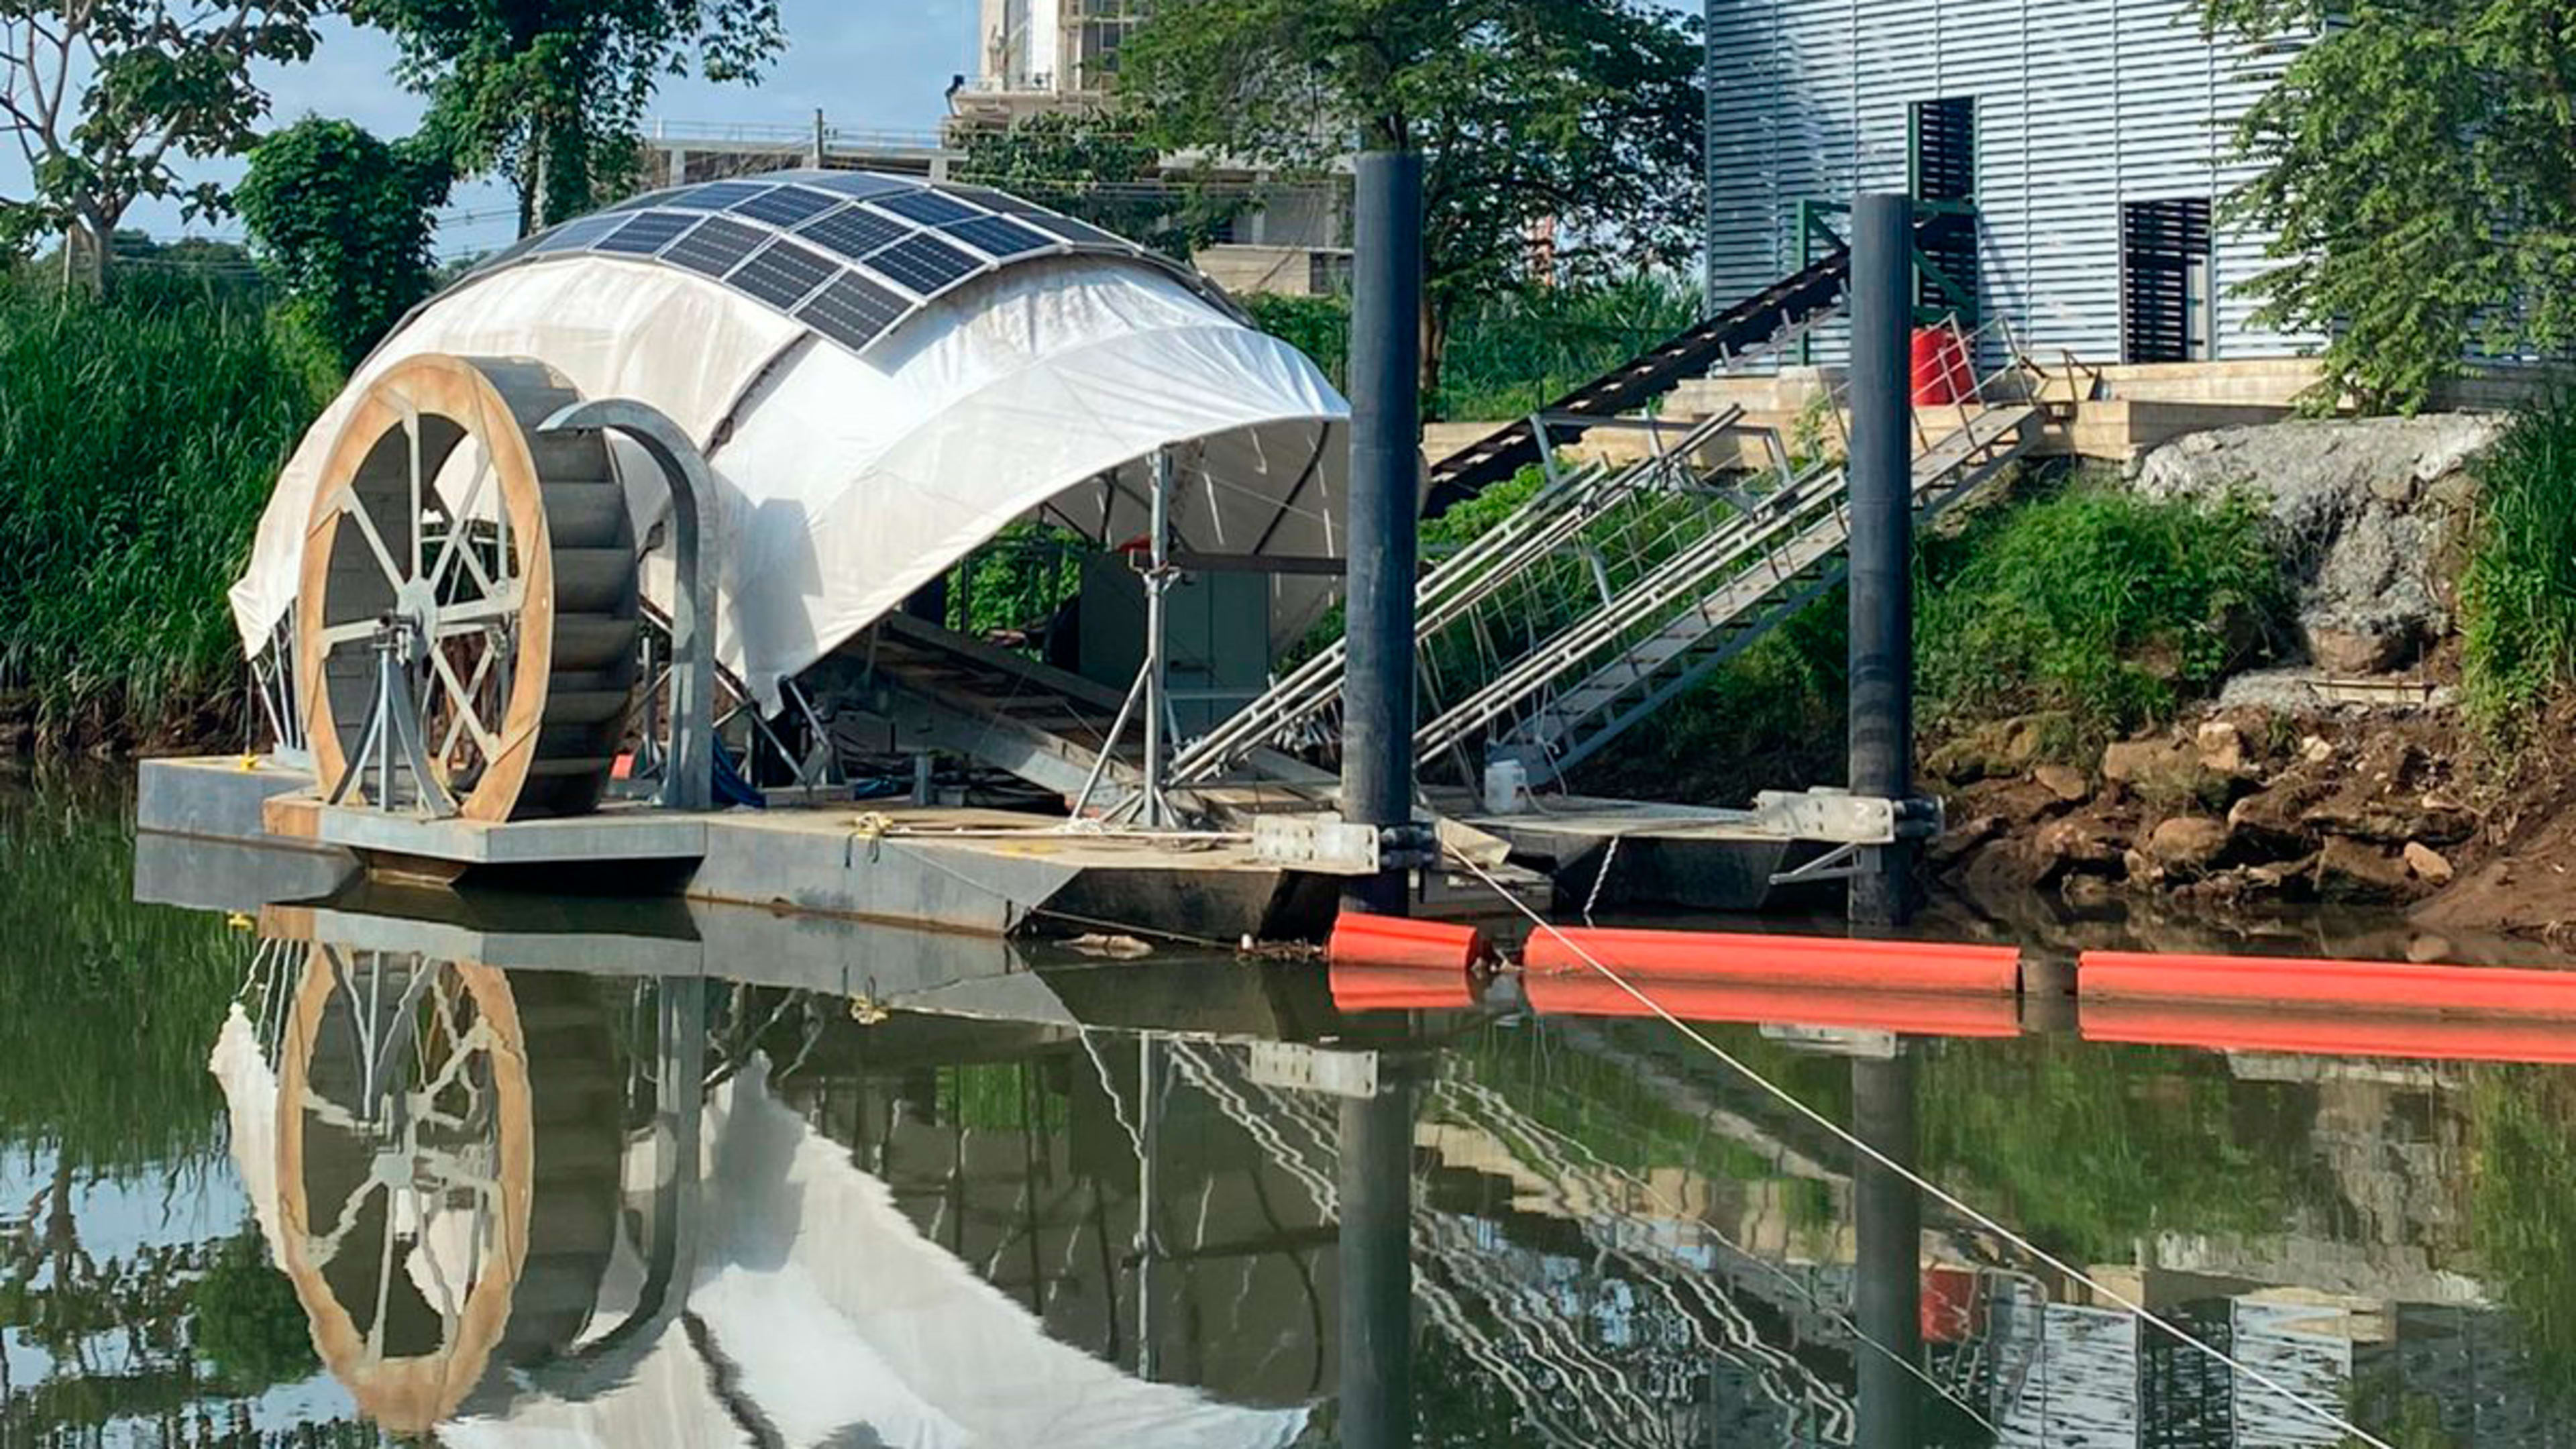 This 52-foot ‘trash wheel’ sucks plastic out of the water so it can be recycled